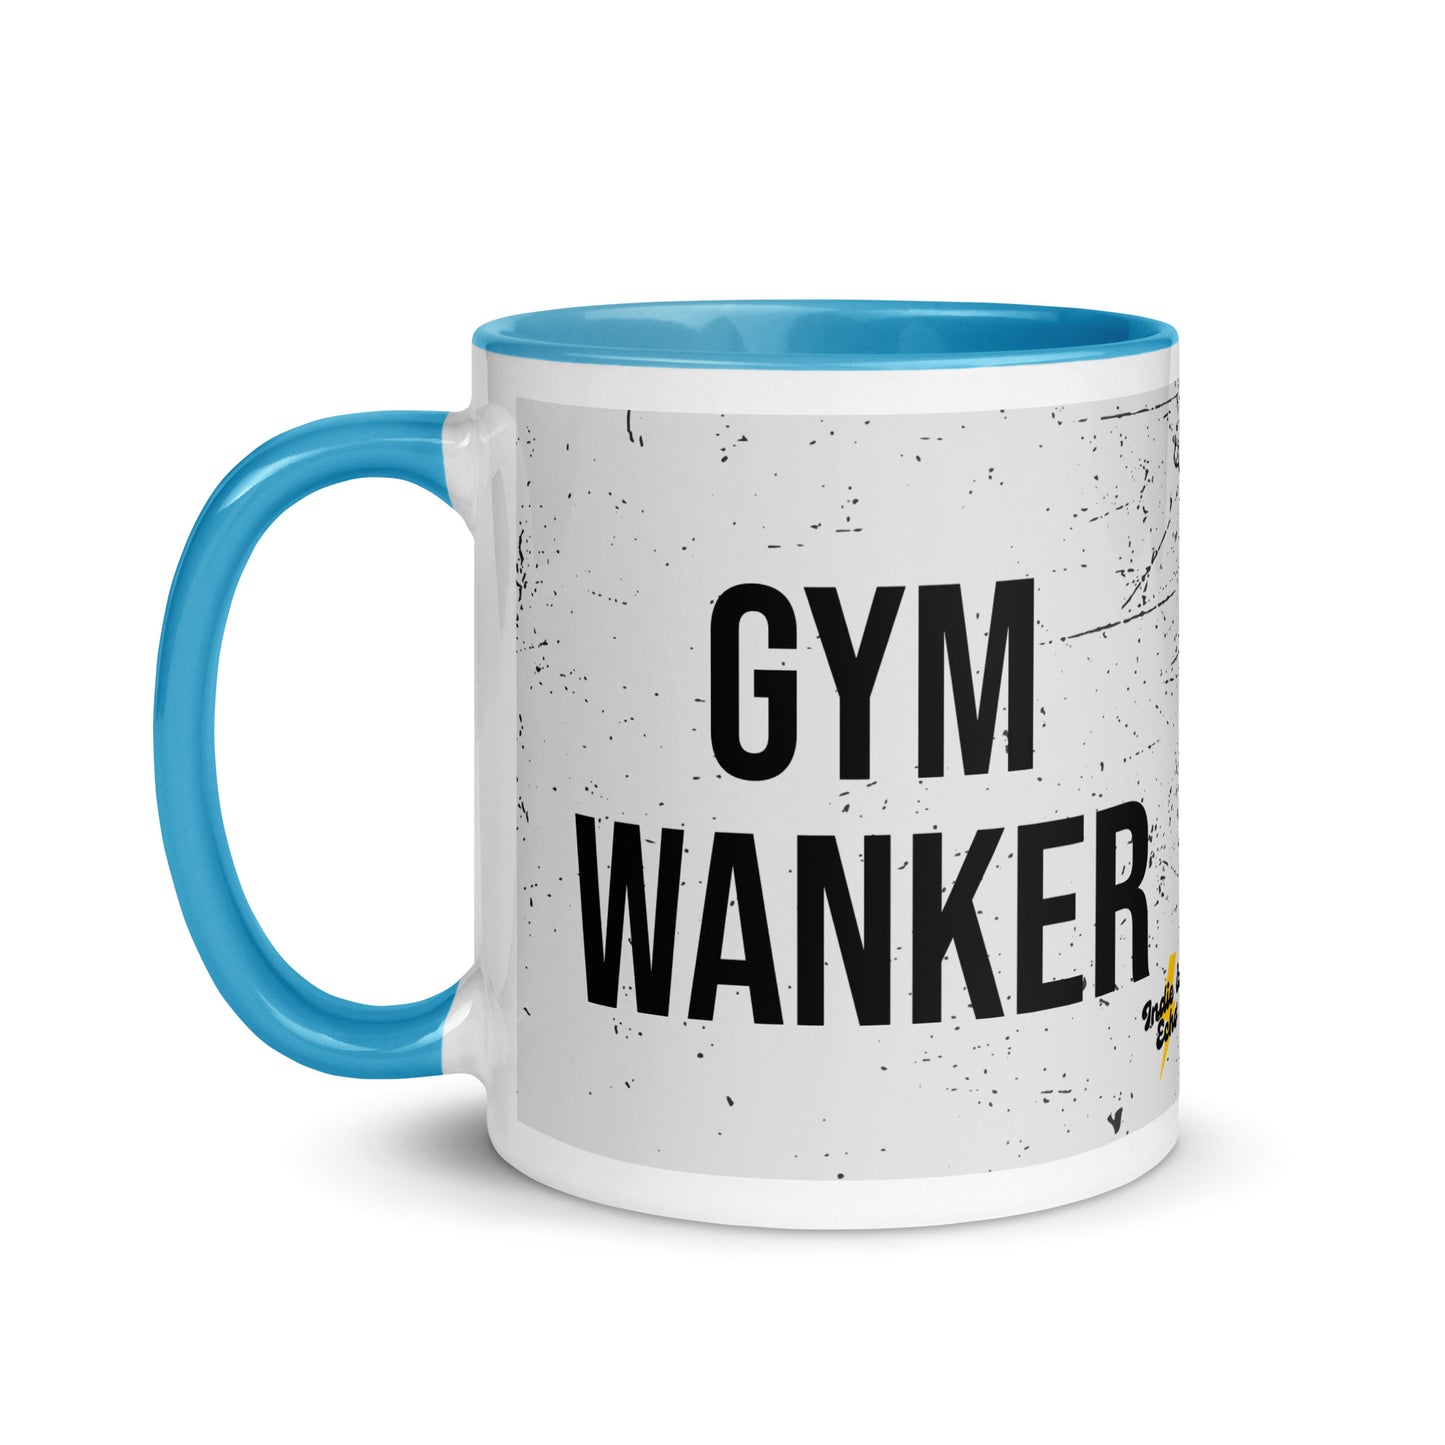 Blue handled mug with gym wanker written on it, across a grey splatter background. A gift for someone who loves the gym.